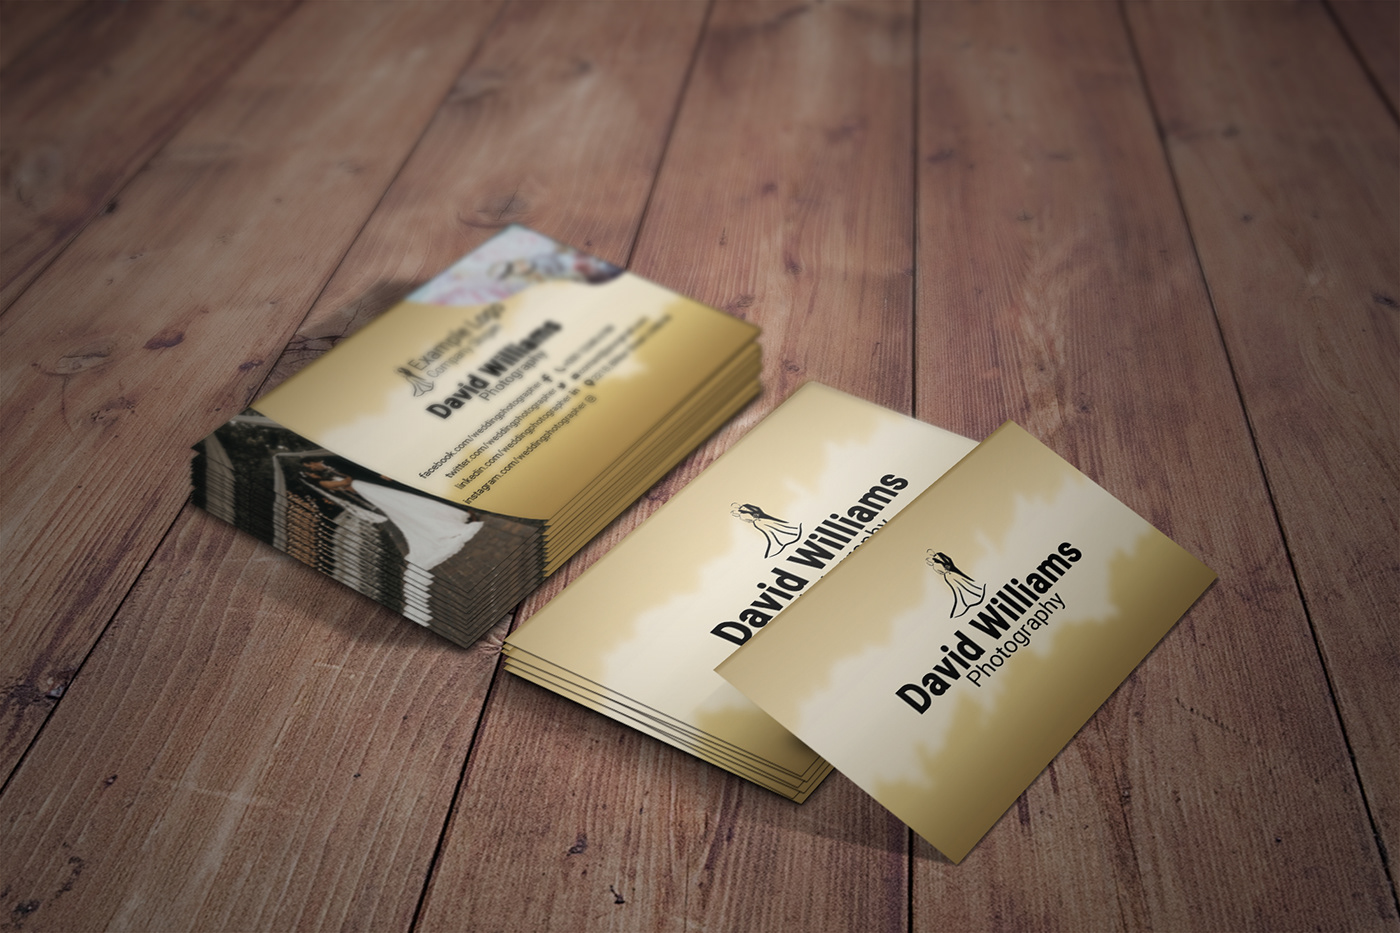 business card card corporate Event photo photographer Photography  Photography studio studio wedding